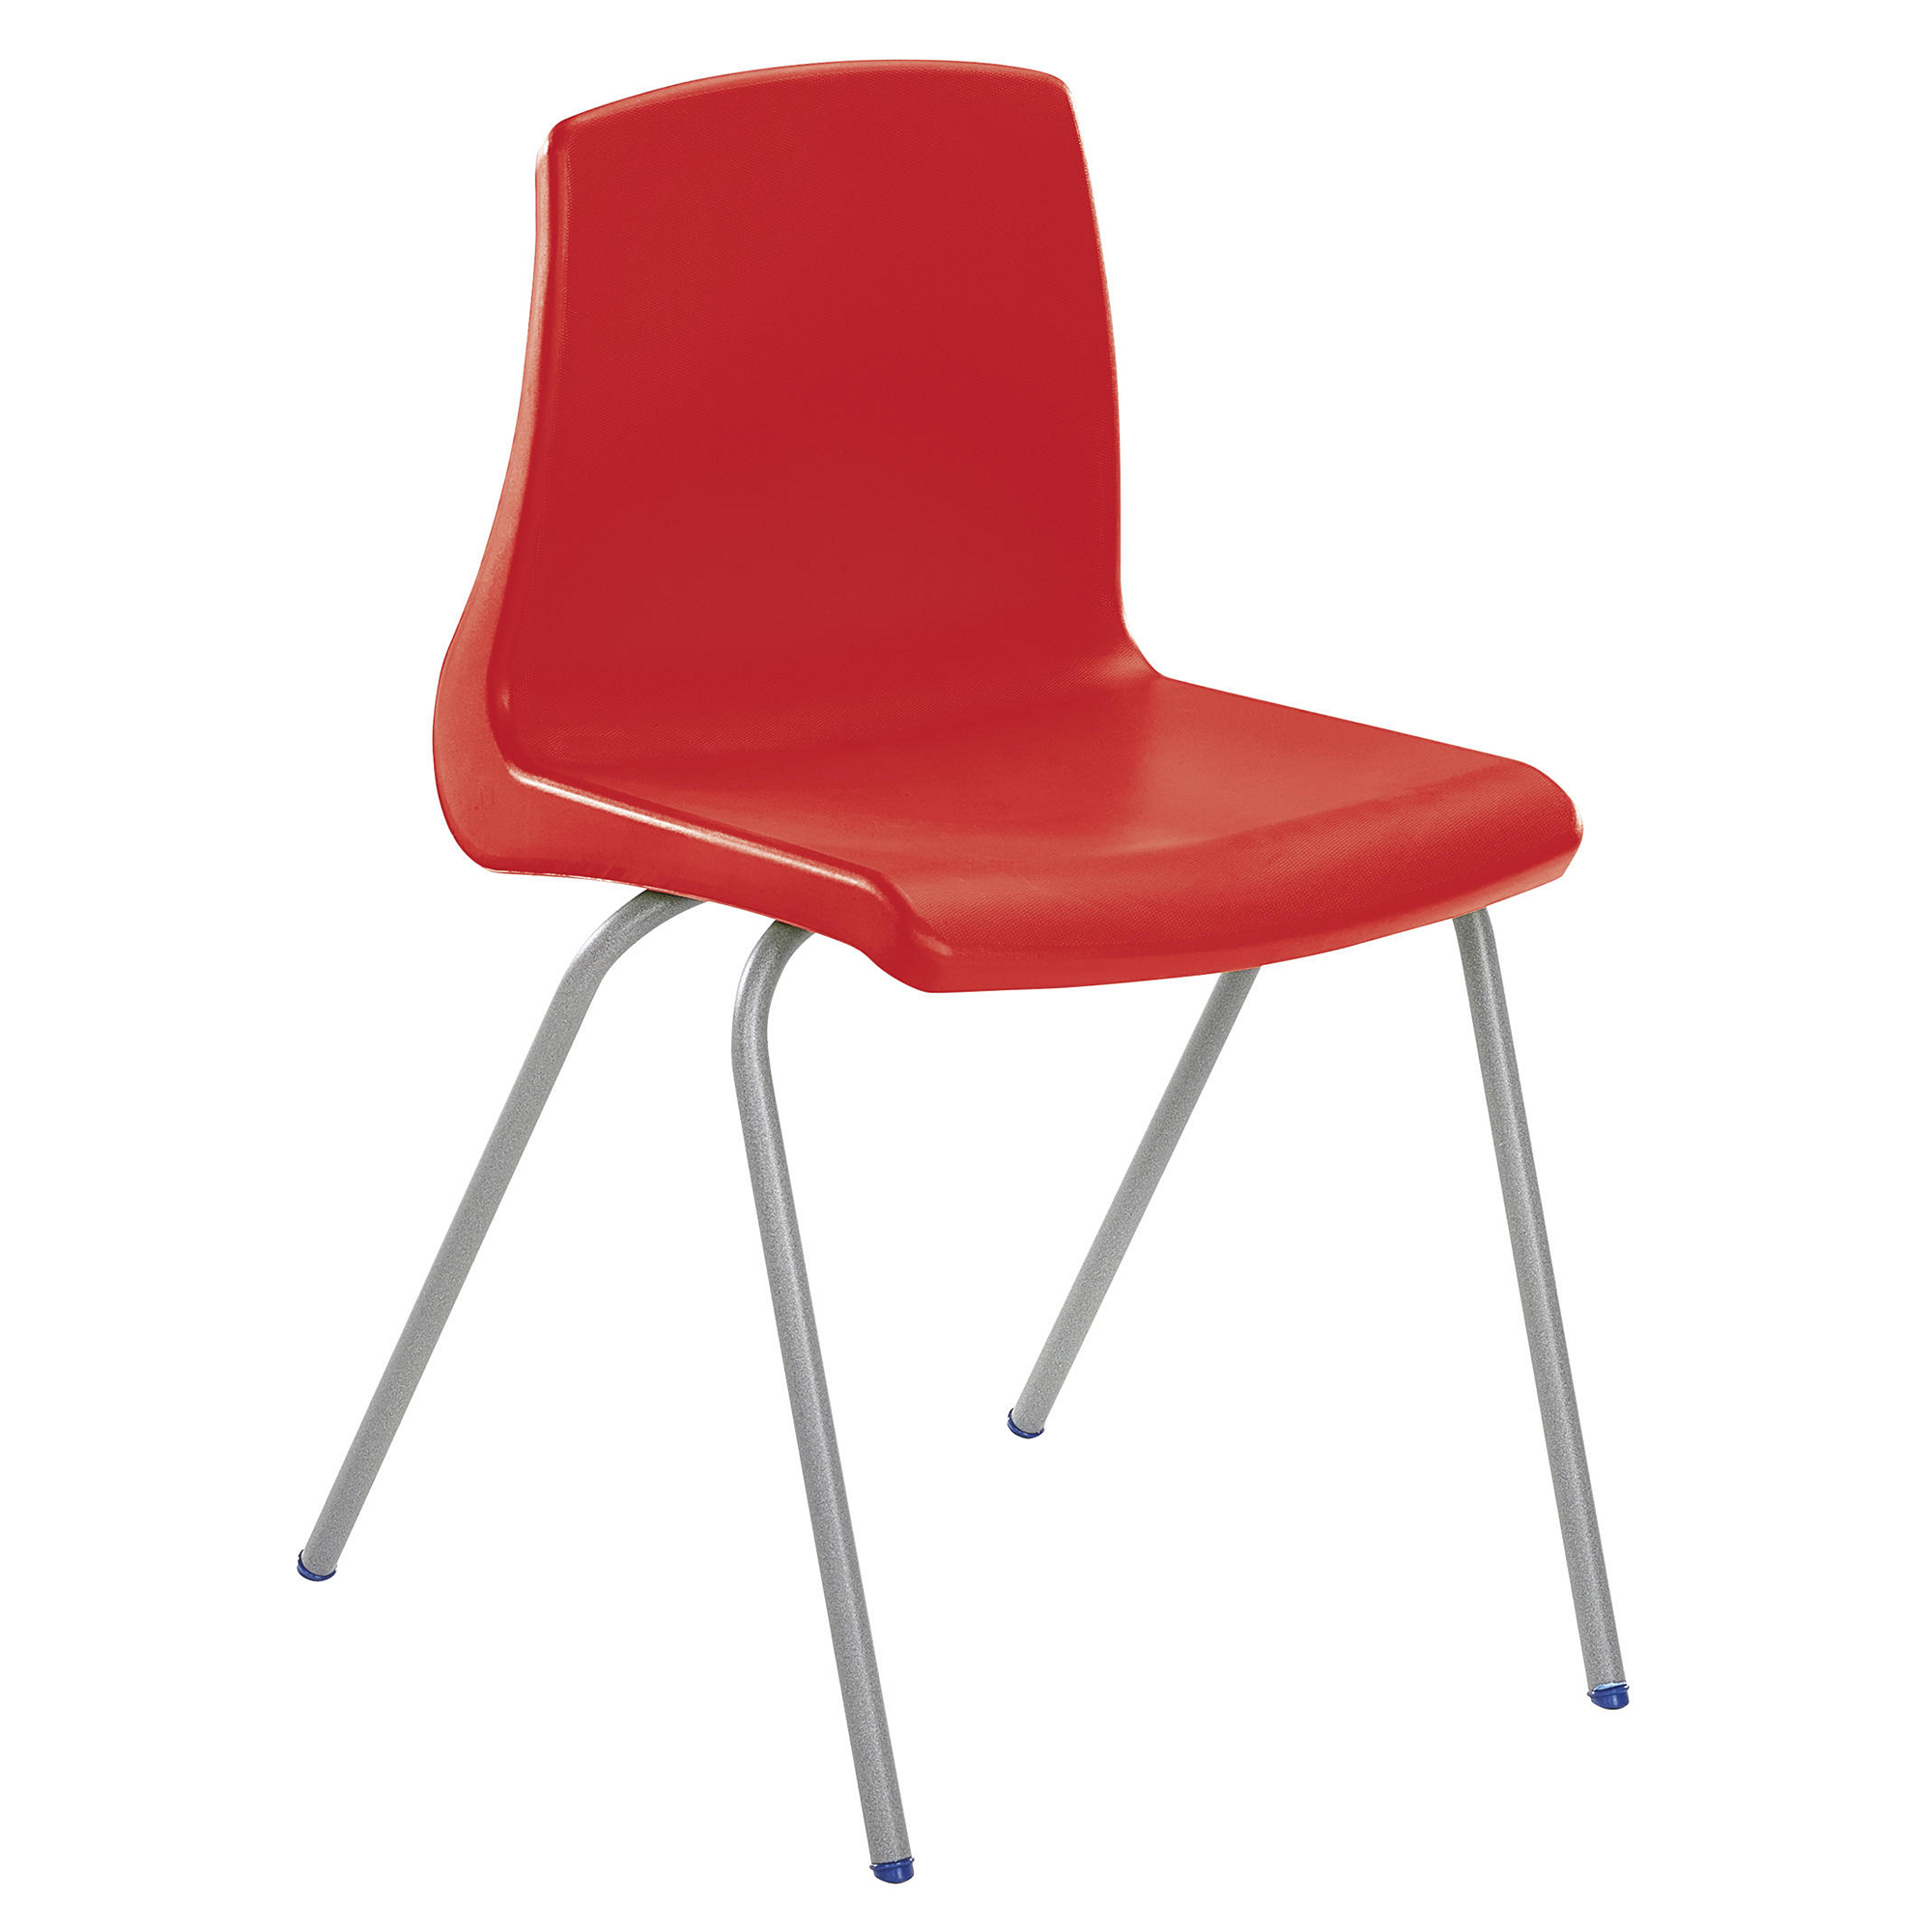 NP Chairs H430mm - Red